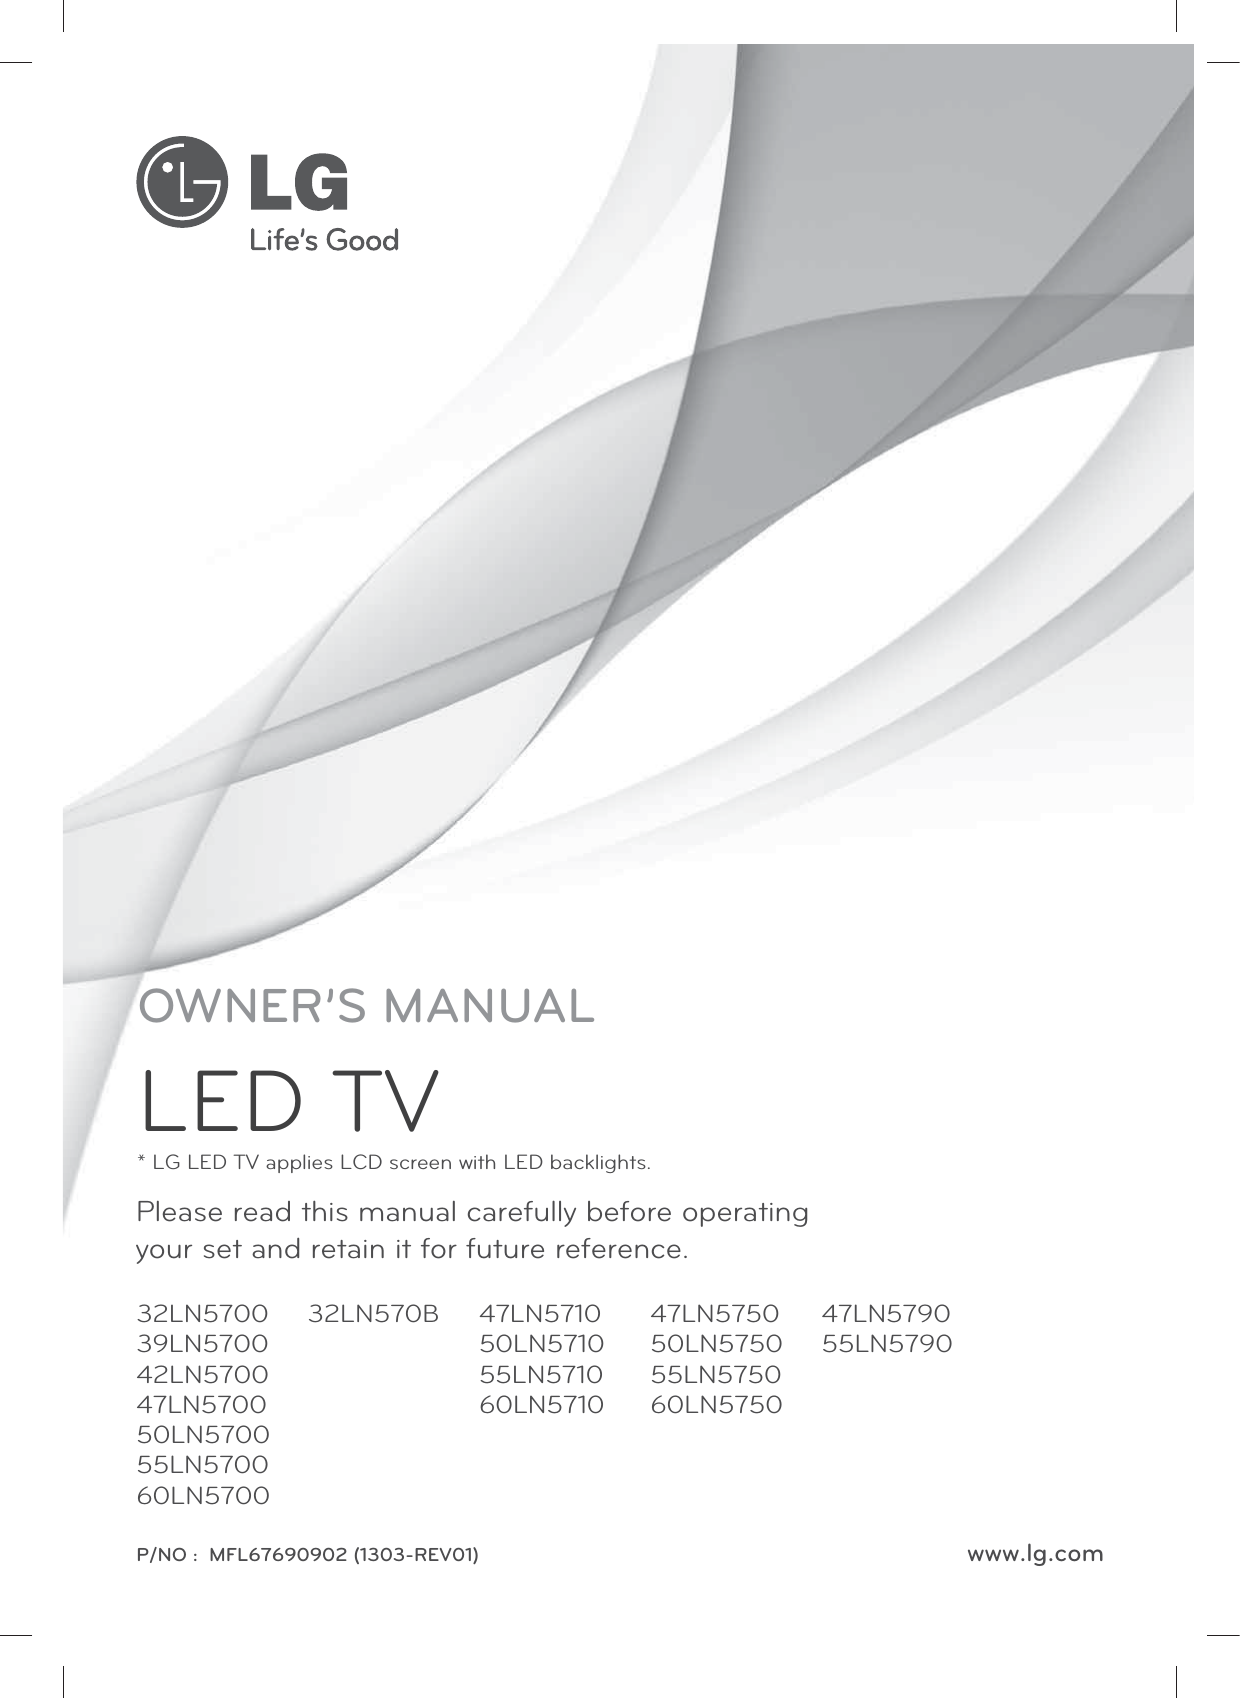 www.lg.comP/NO :  MFL67690902 (1303-REV01)Please read this manual carefully before operating your set and retain it for future reference.OWNER’S MANUALLED TV* LG LED TV applies LCD screen with LED backlights.32LN570039LN570042LN570047LN570050LN570055LN570060LN570047LN5710 50LN571055LN5710 60LN571032LN570B 47LN5750 50LN575055LN5750 60LN575047LN579055LN5790